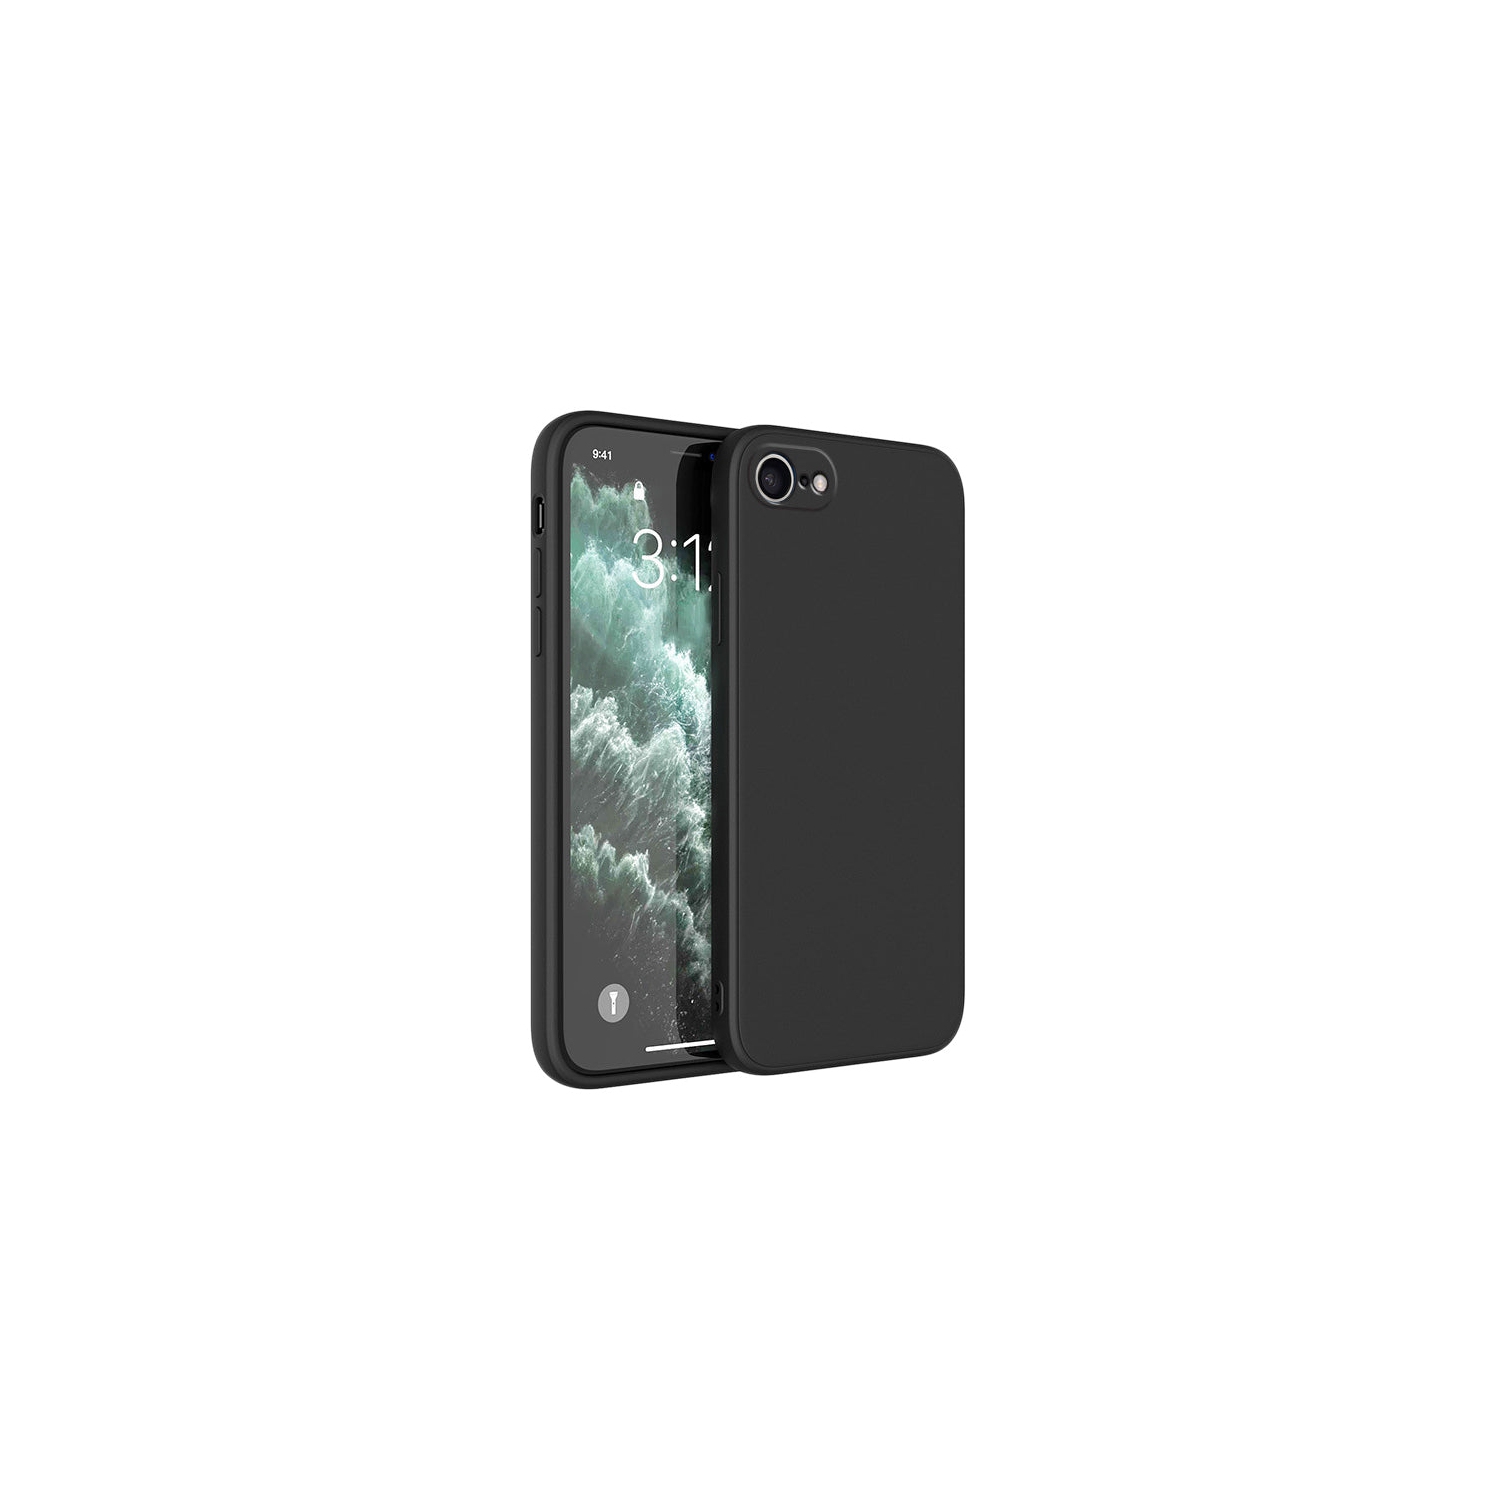 PANDACO Soft Shell Matte Black Case for iPhone 6 Plus or iPhone 6S Plus